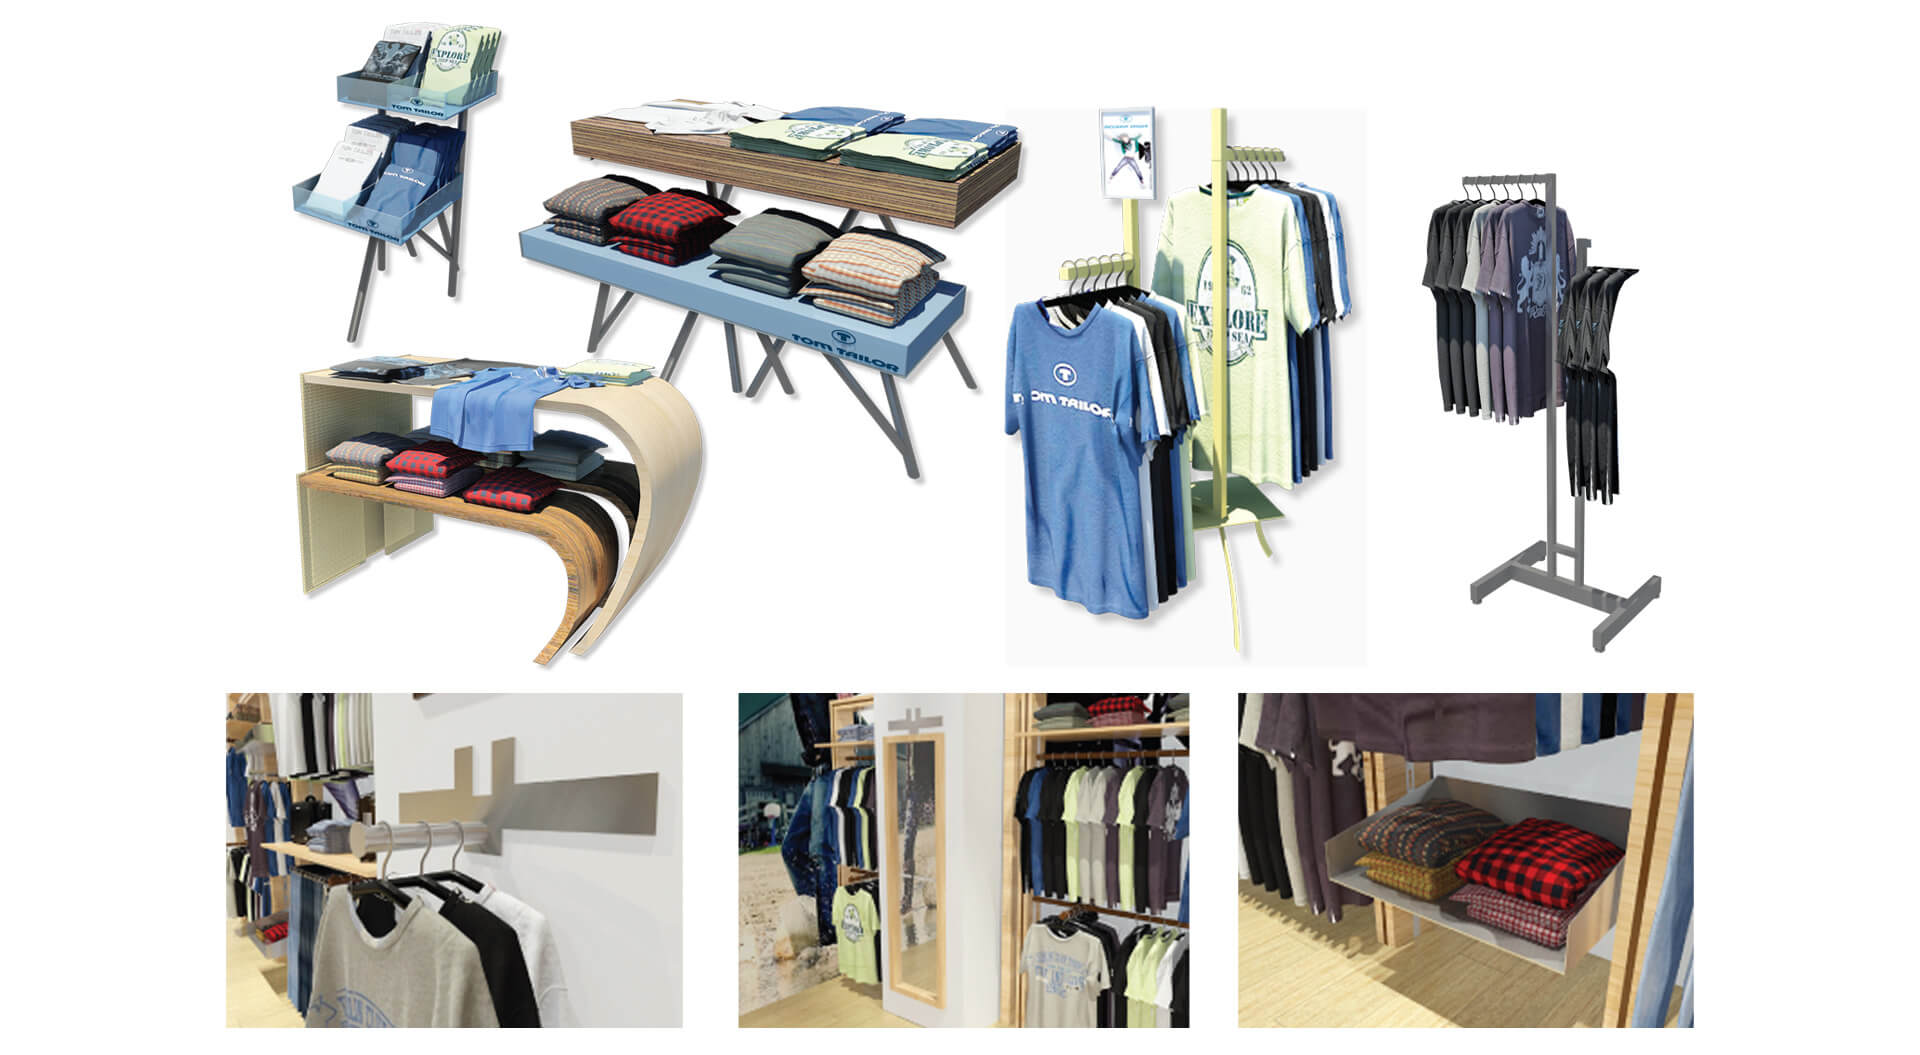 Tom Taylor Germany retail interior fashion store design, 3D models of merchandising systems